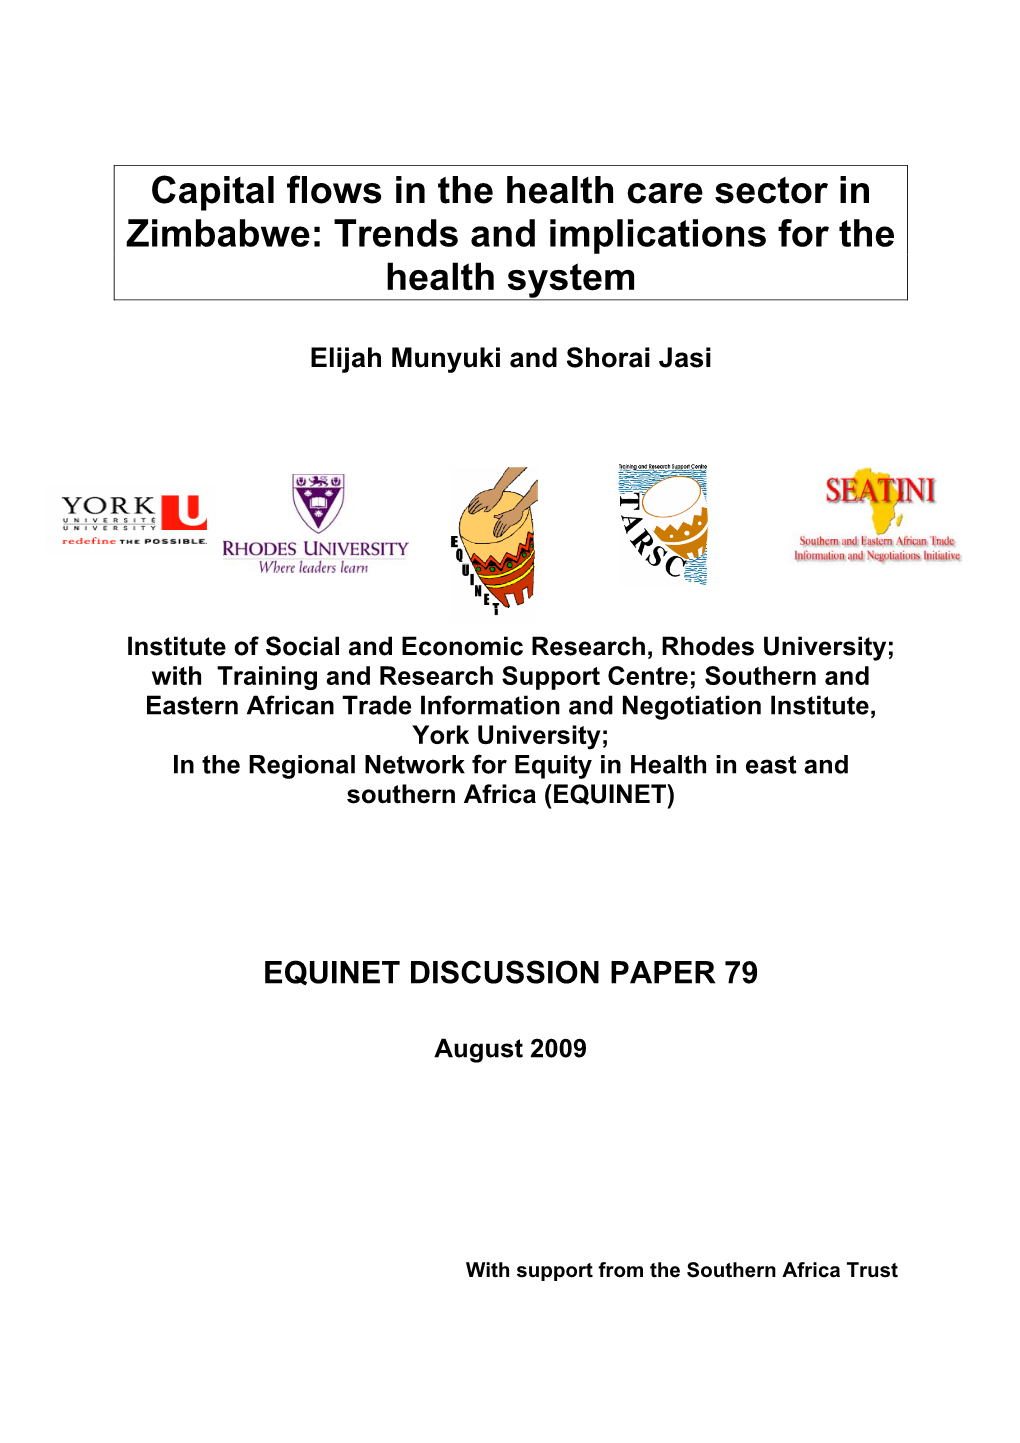 Capital Flows in the Health Care Sector in Zimbabwe: Trends and Implications for the Health System